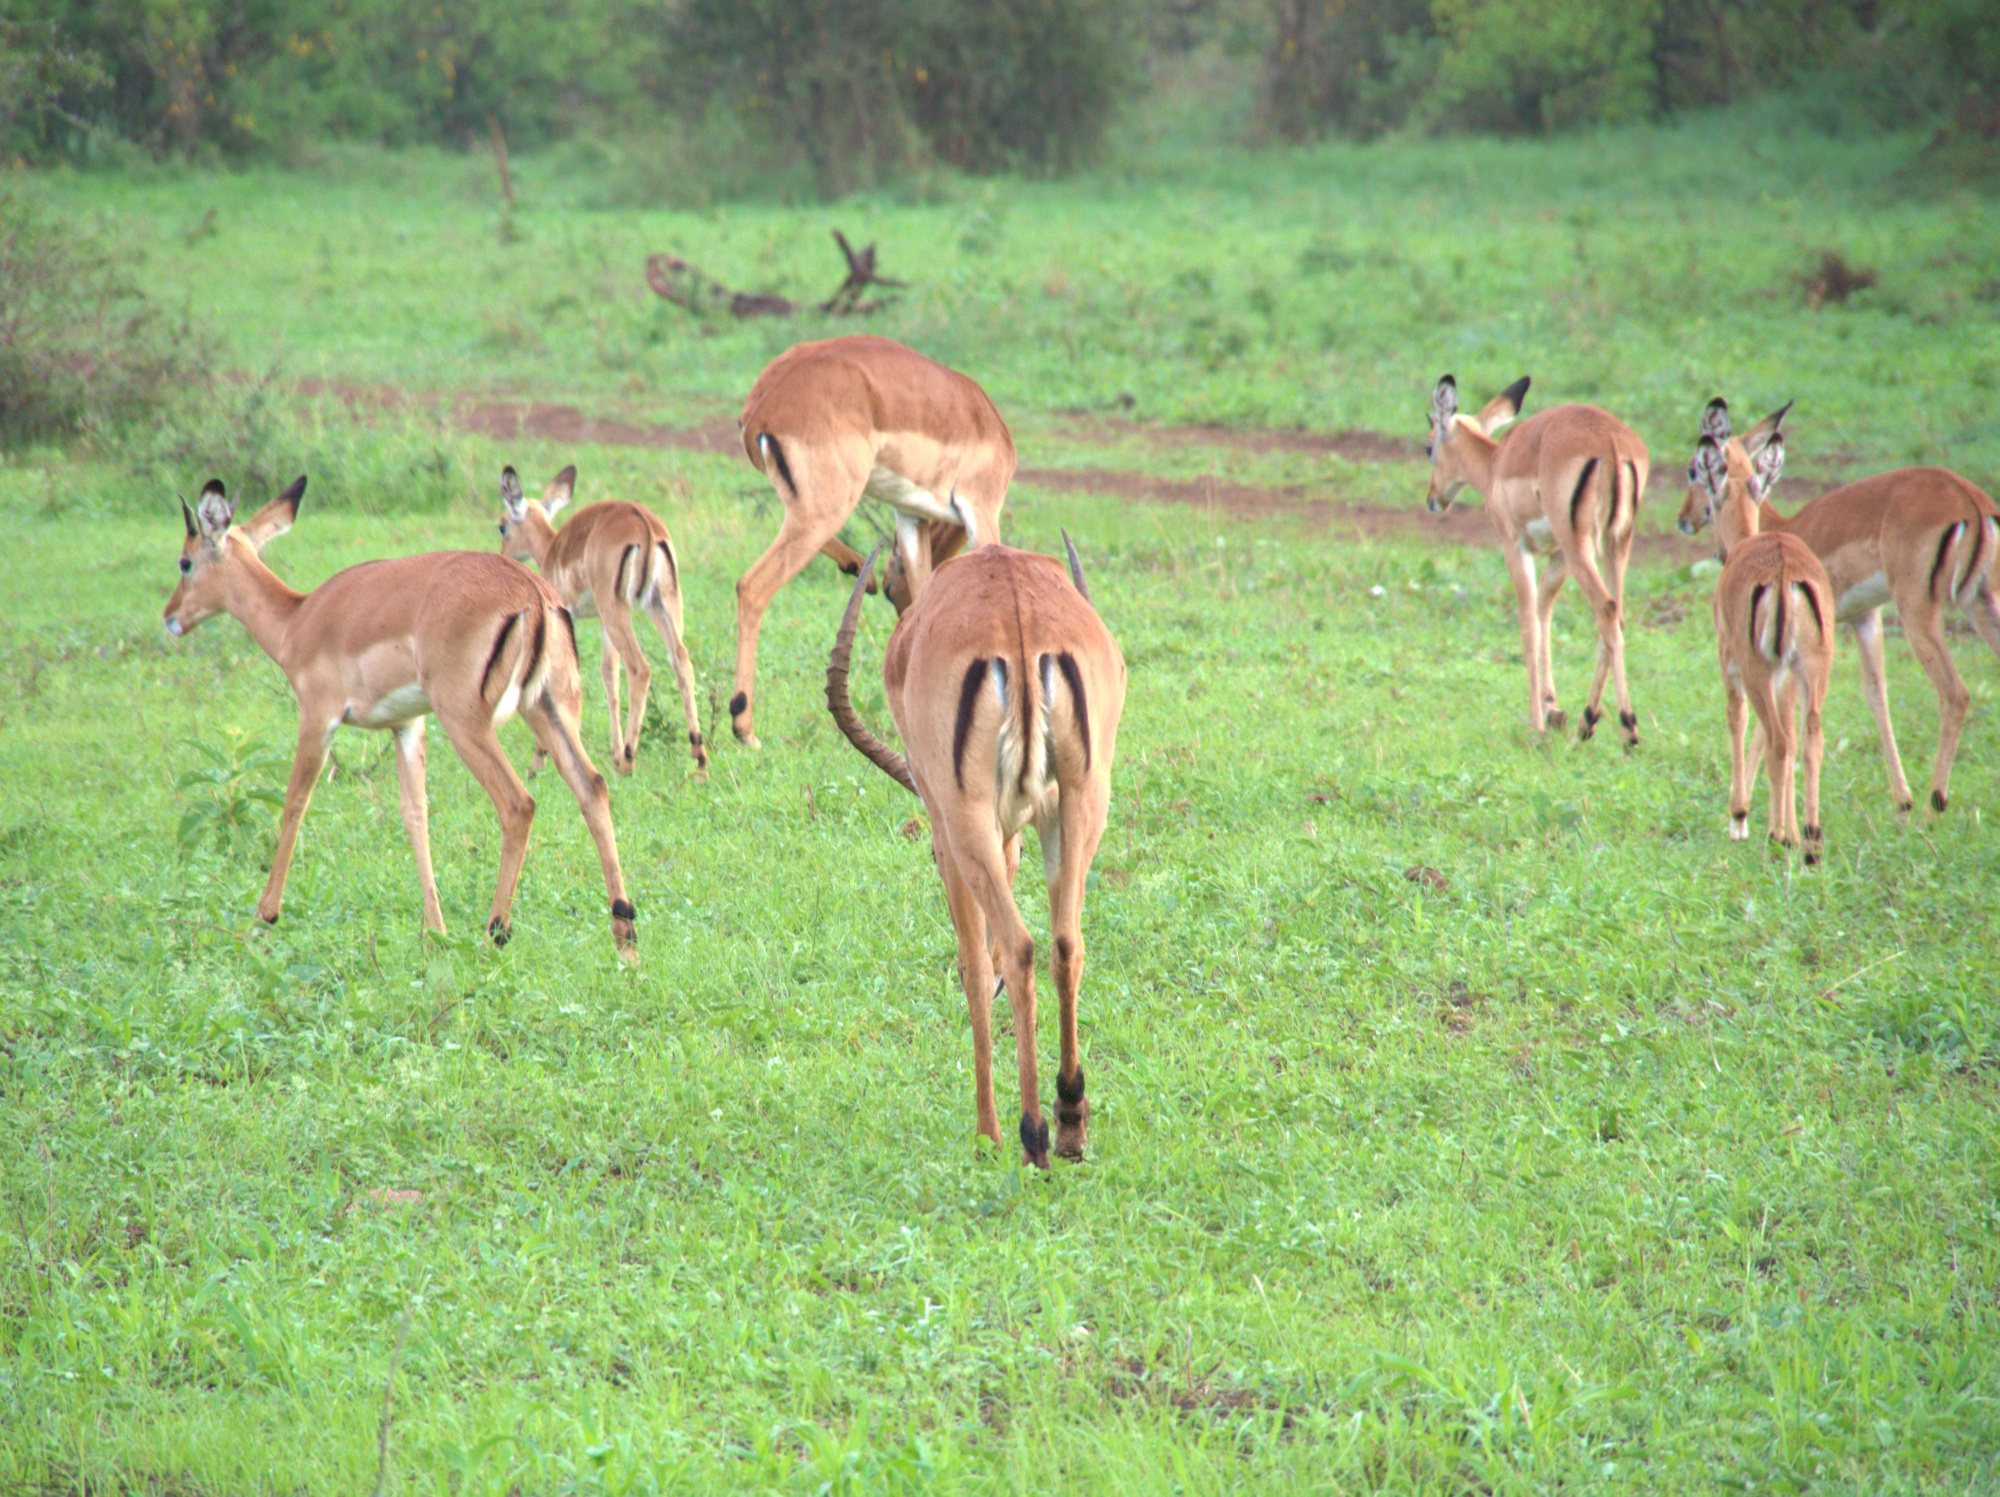 Impalas: Our guide told us the black M on their rump  signifies they are McDonalds for Lions